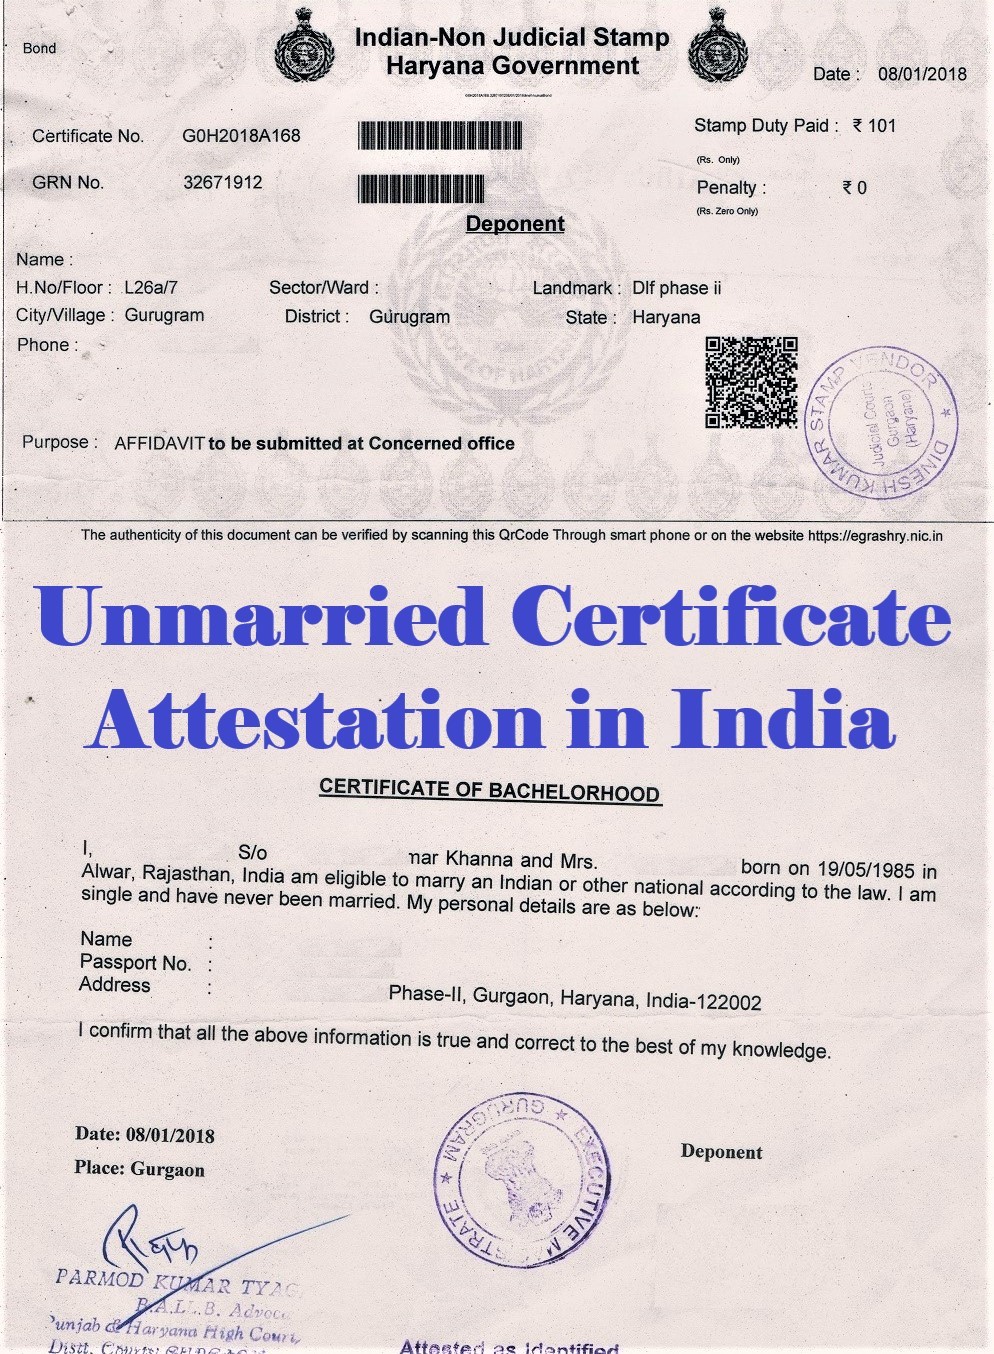 Unmarried Certificate Attestation from Saudi Arabia Embassy